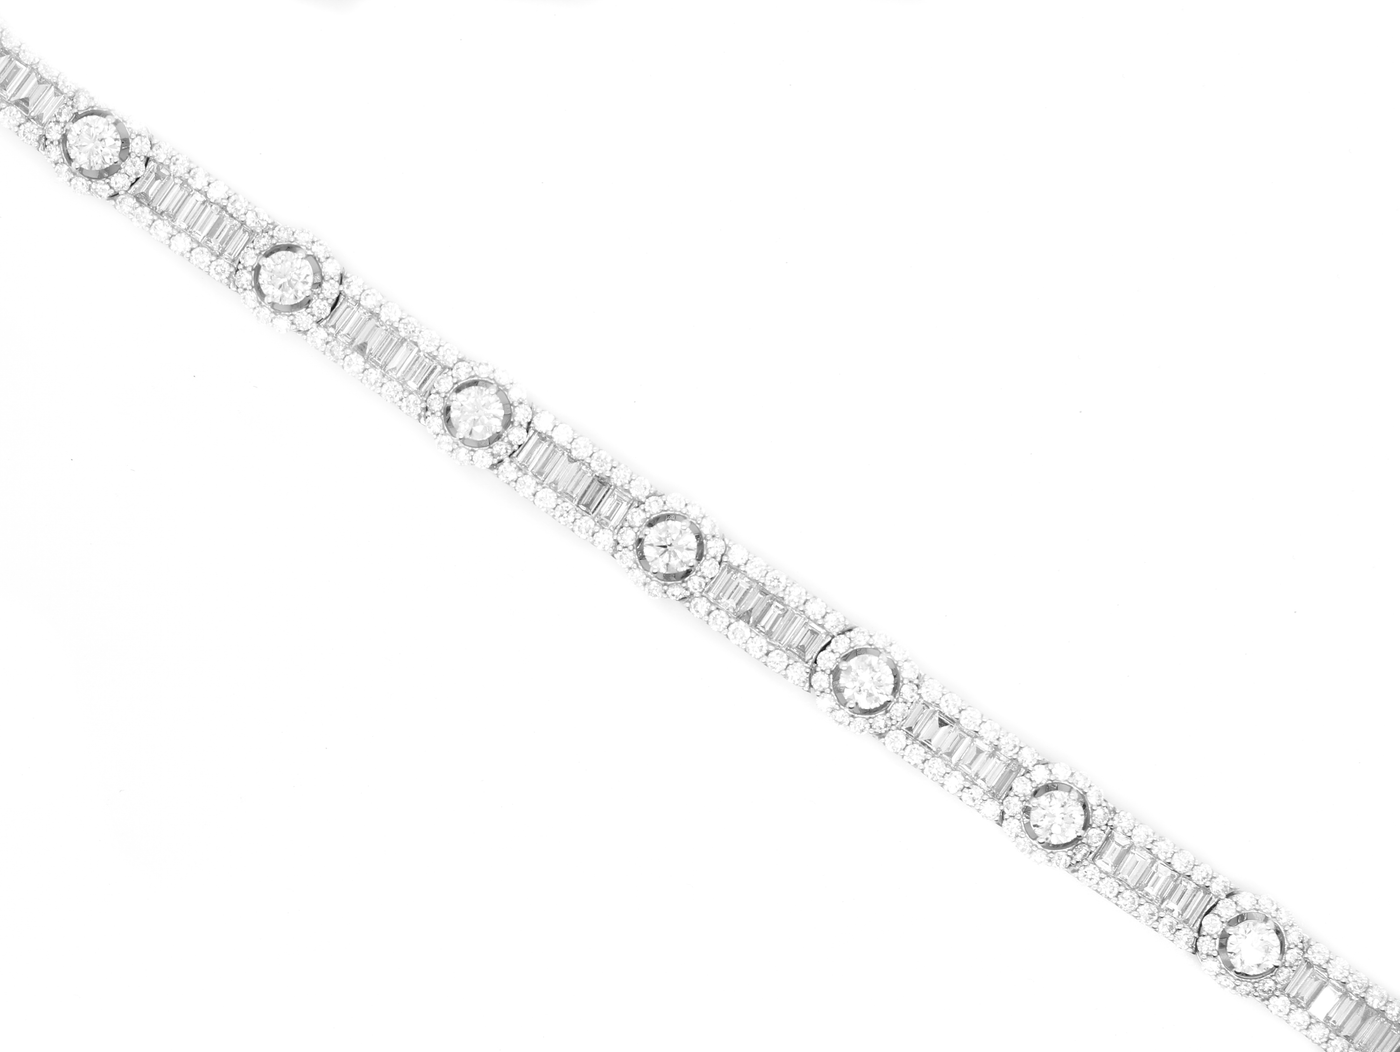 12ct Round Halo Diamond Station and Baguette Link Bracelet